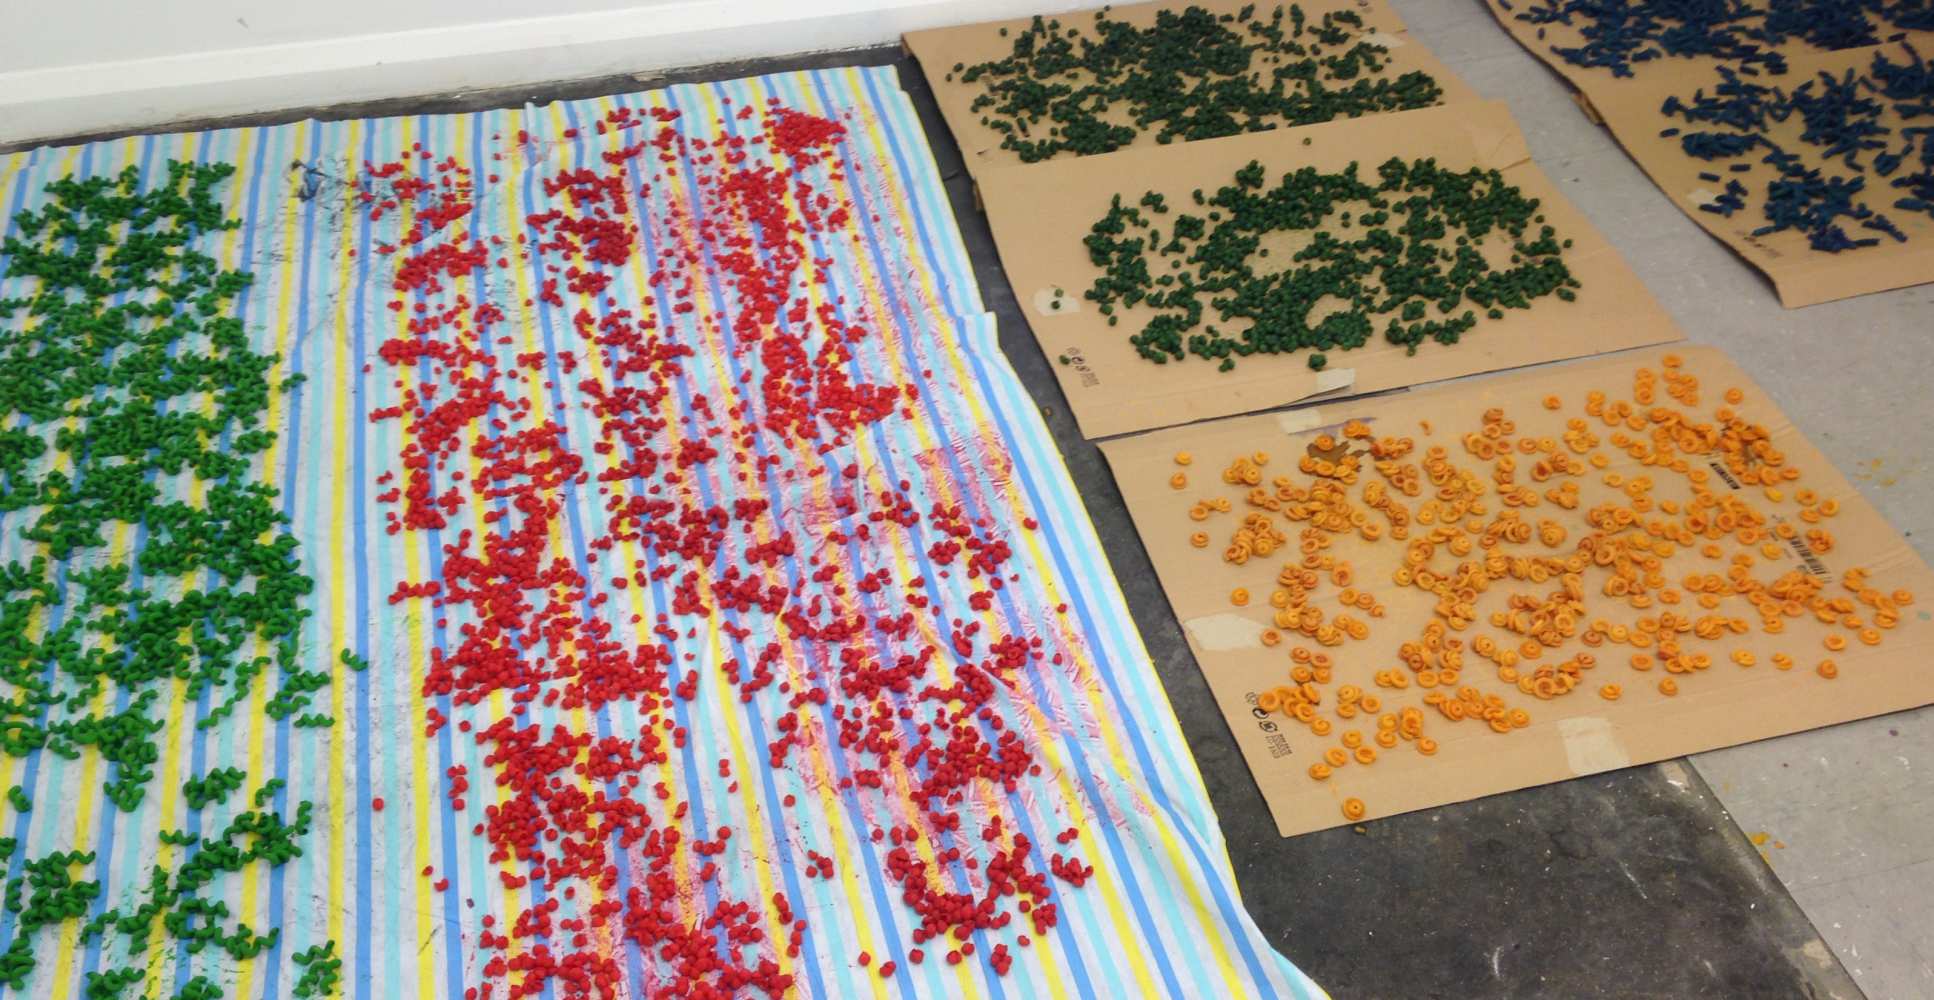 Drying dyed pasta